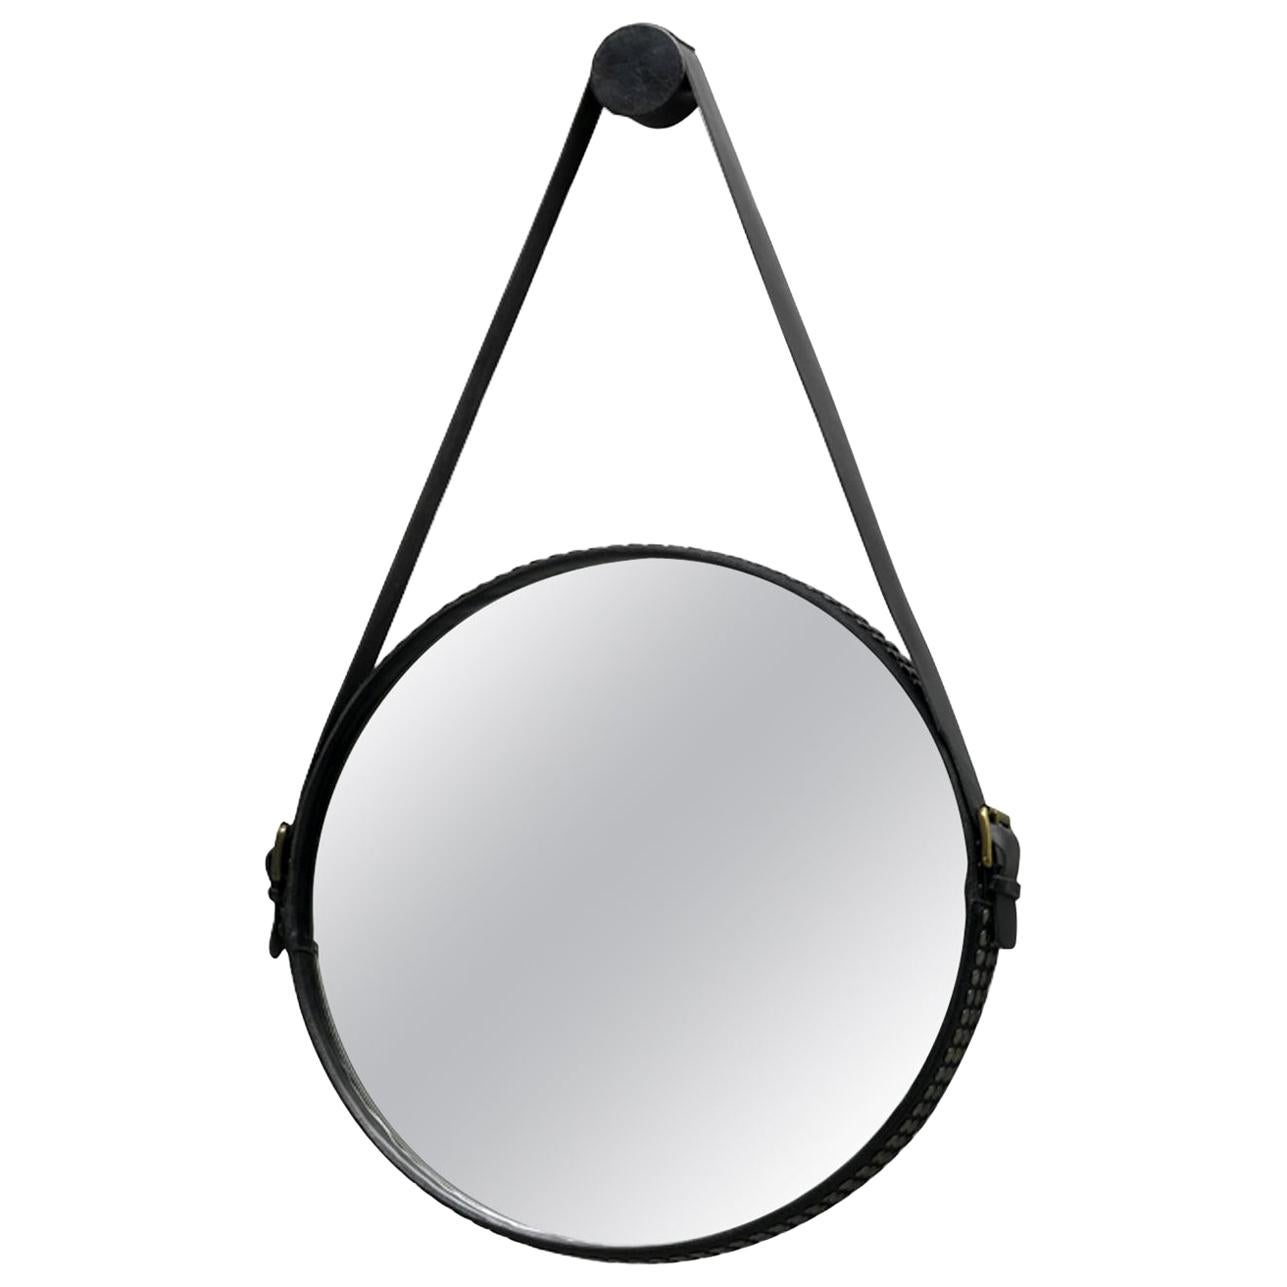 "Ego Stud" Wall Mirror Steel & Studded Black Leather Framed by Moroso for Diesel